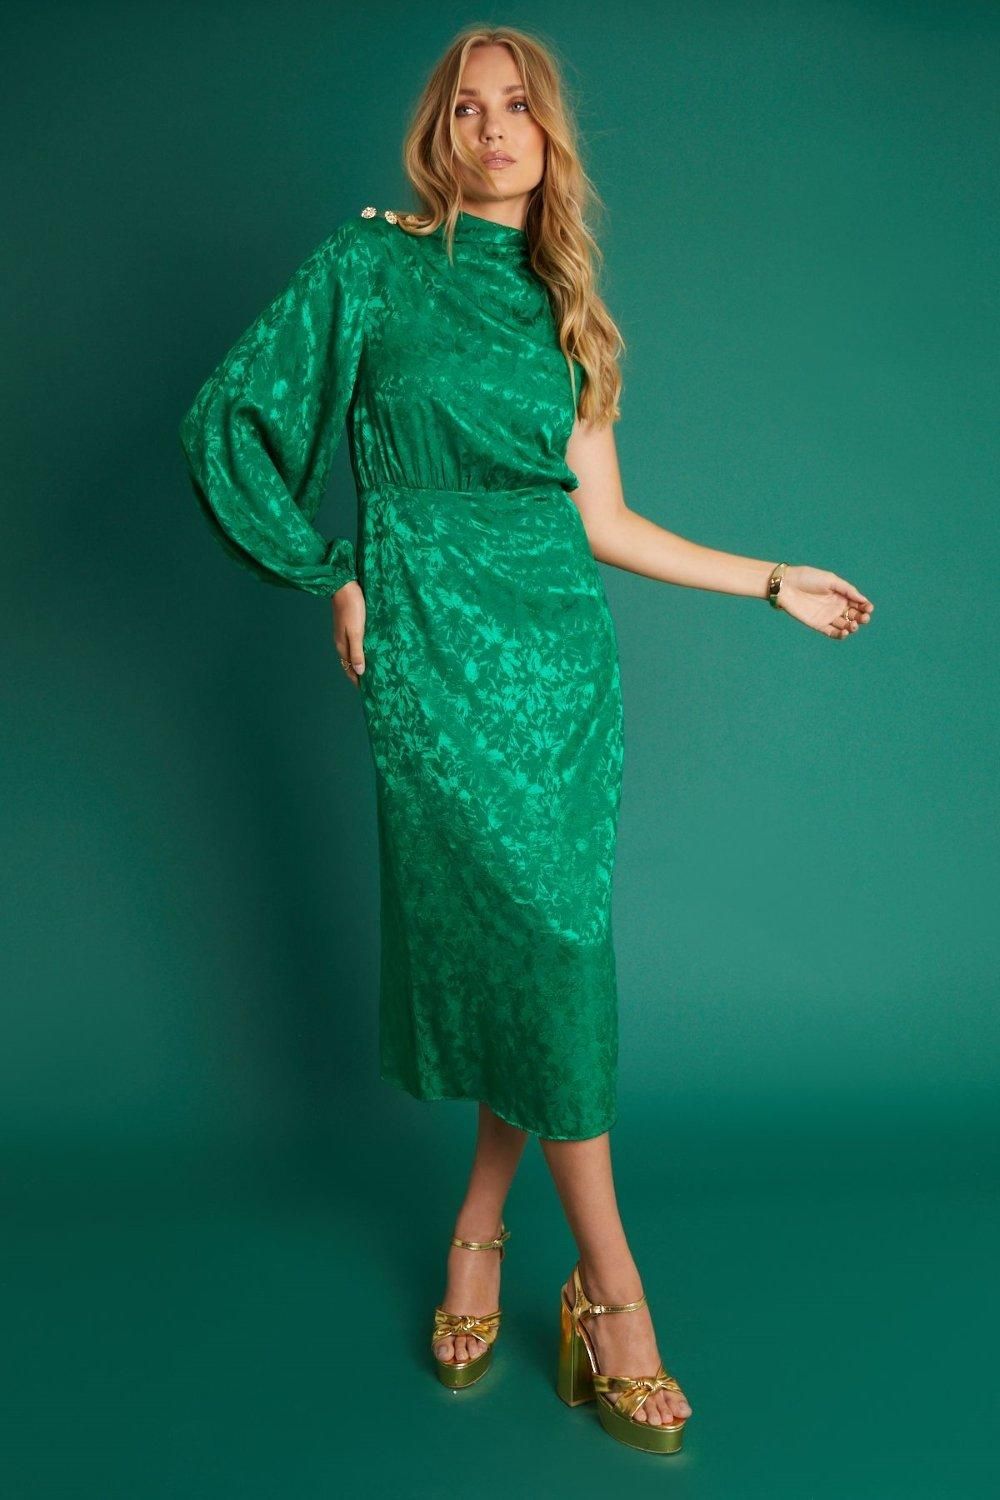 Dresses | One Shoulder Jacquard Midi Dress With Gold Buttons In Green | ANOTHER SUNDAY | Debenhams UK